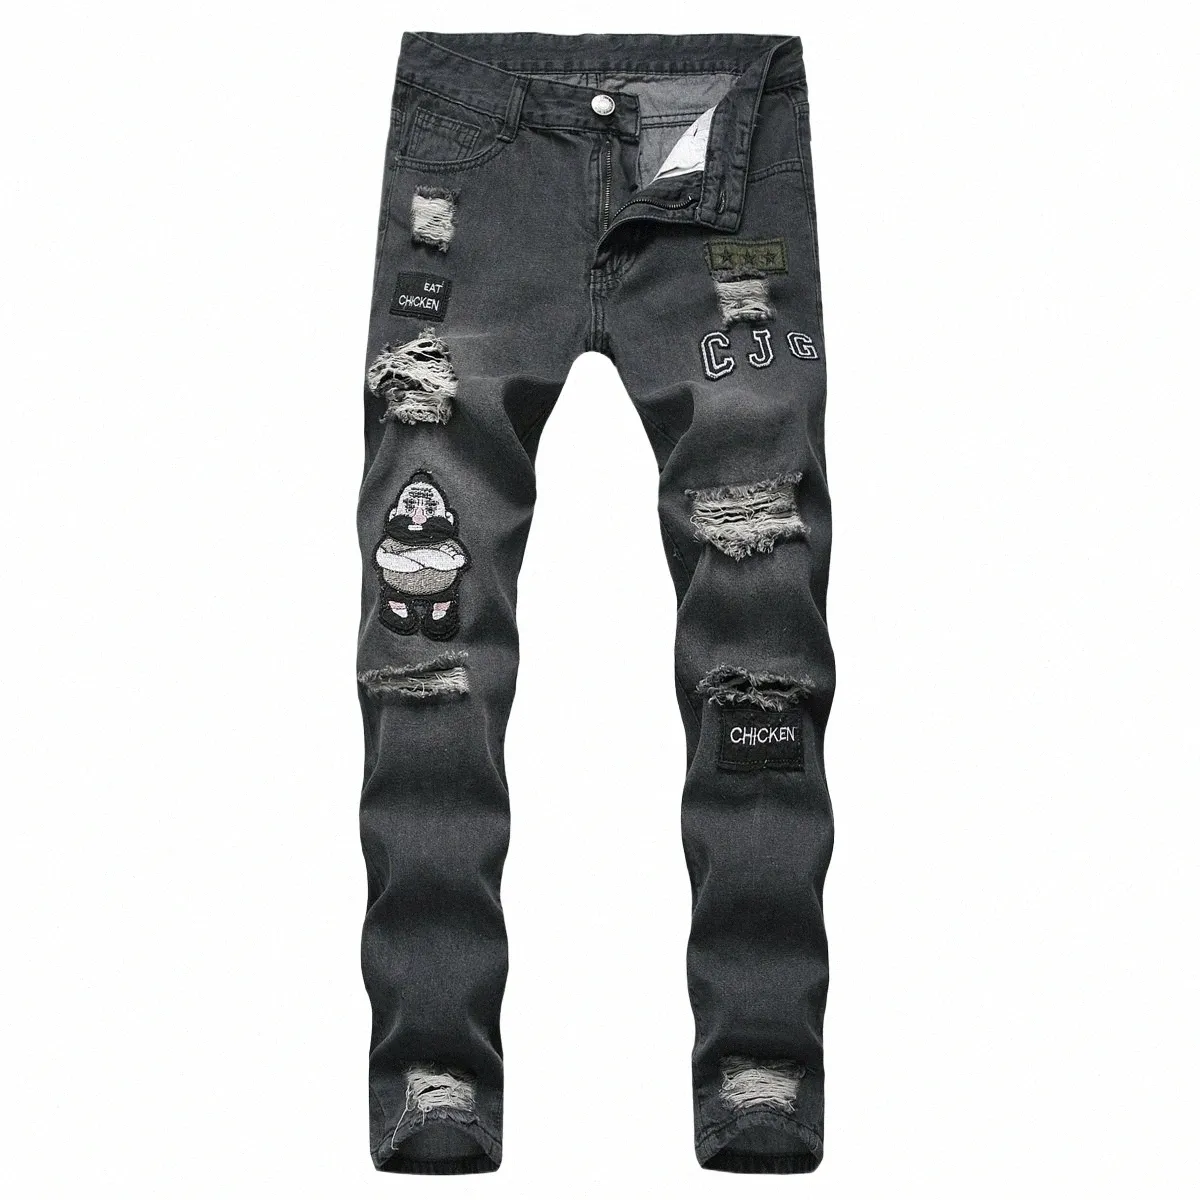 2020 New Men Stretchy Ripped Skinny Biker Embroidery Print Jeans Destroyed Hole Taped Slim Fit Denim Scratched High Quality Jean Q87b#